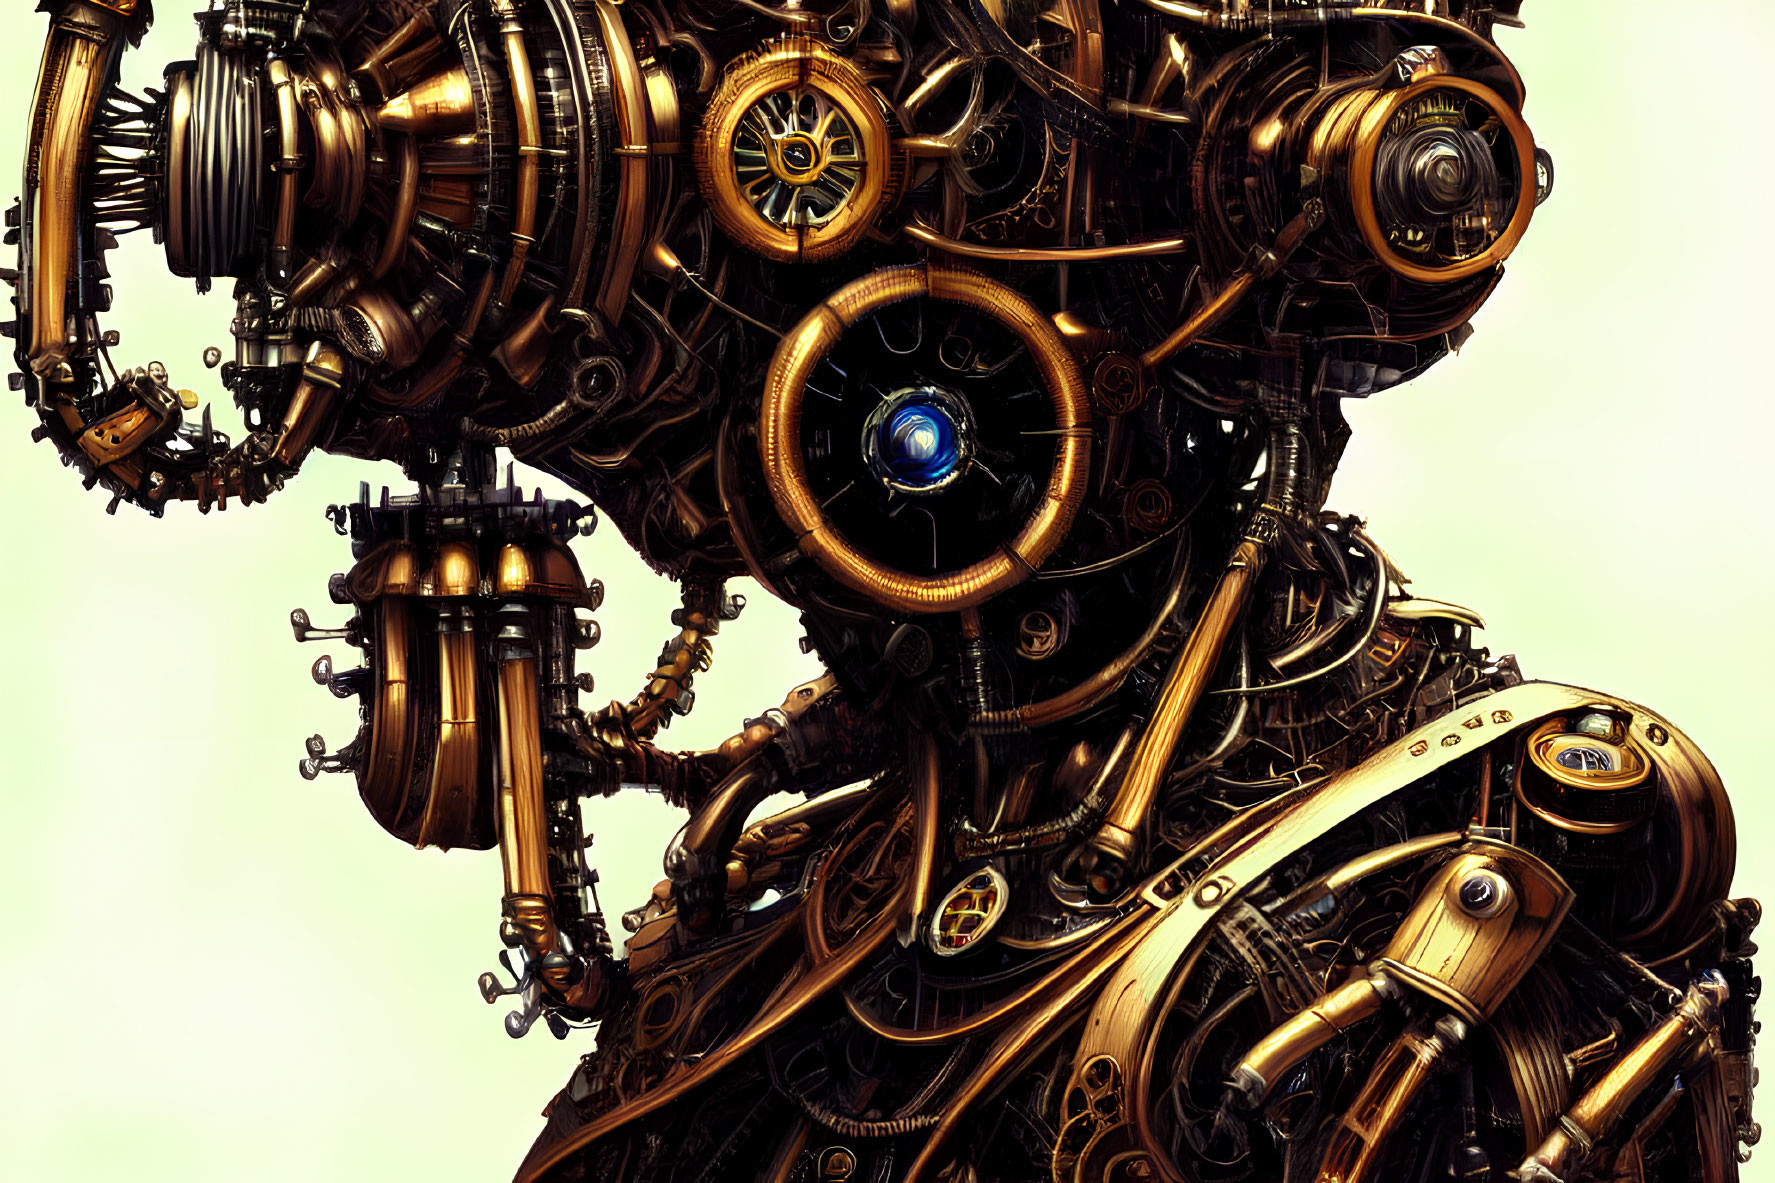 Intricate steampunk machinery with central blue eye